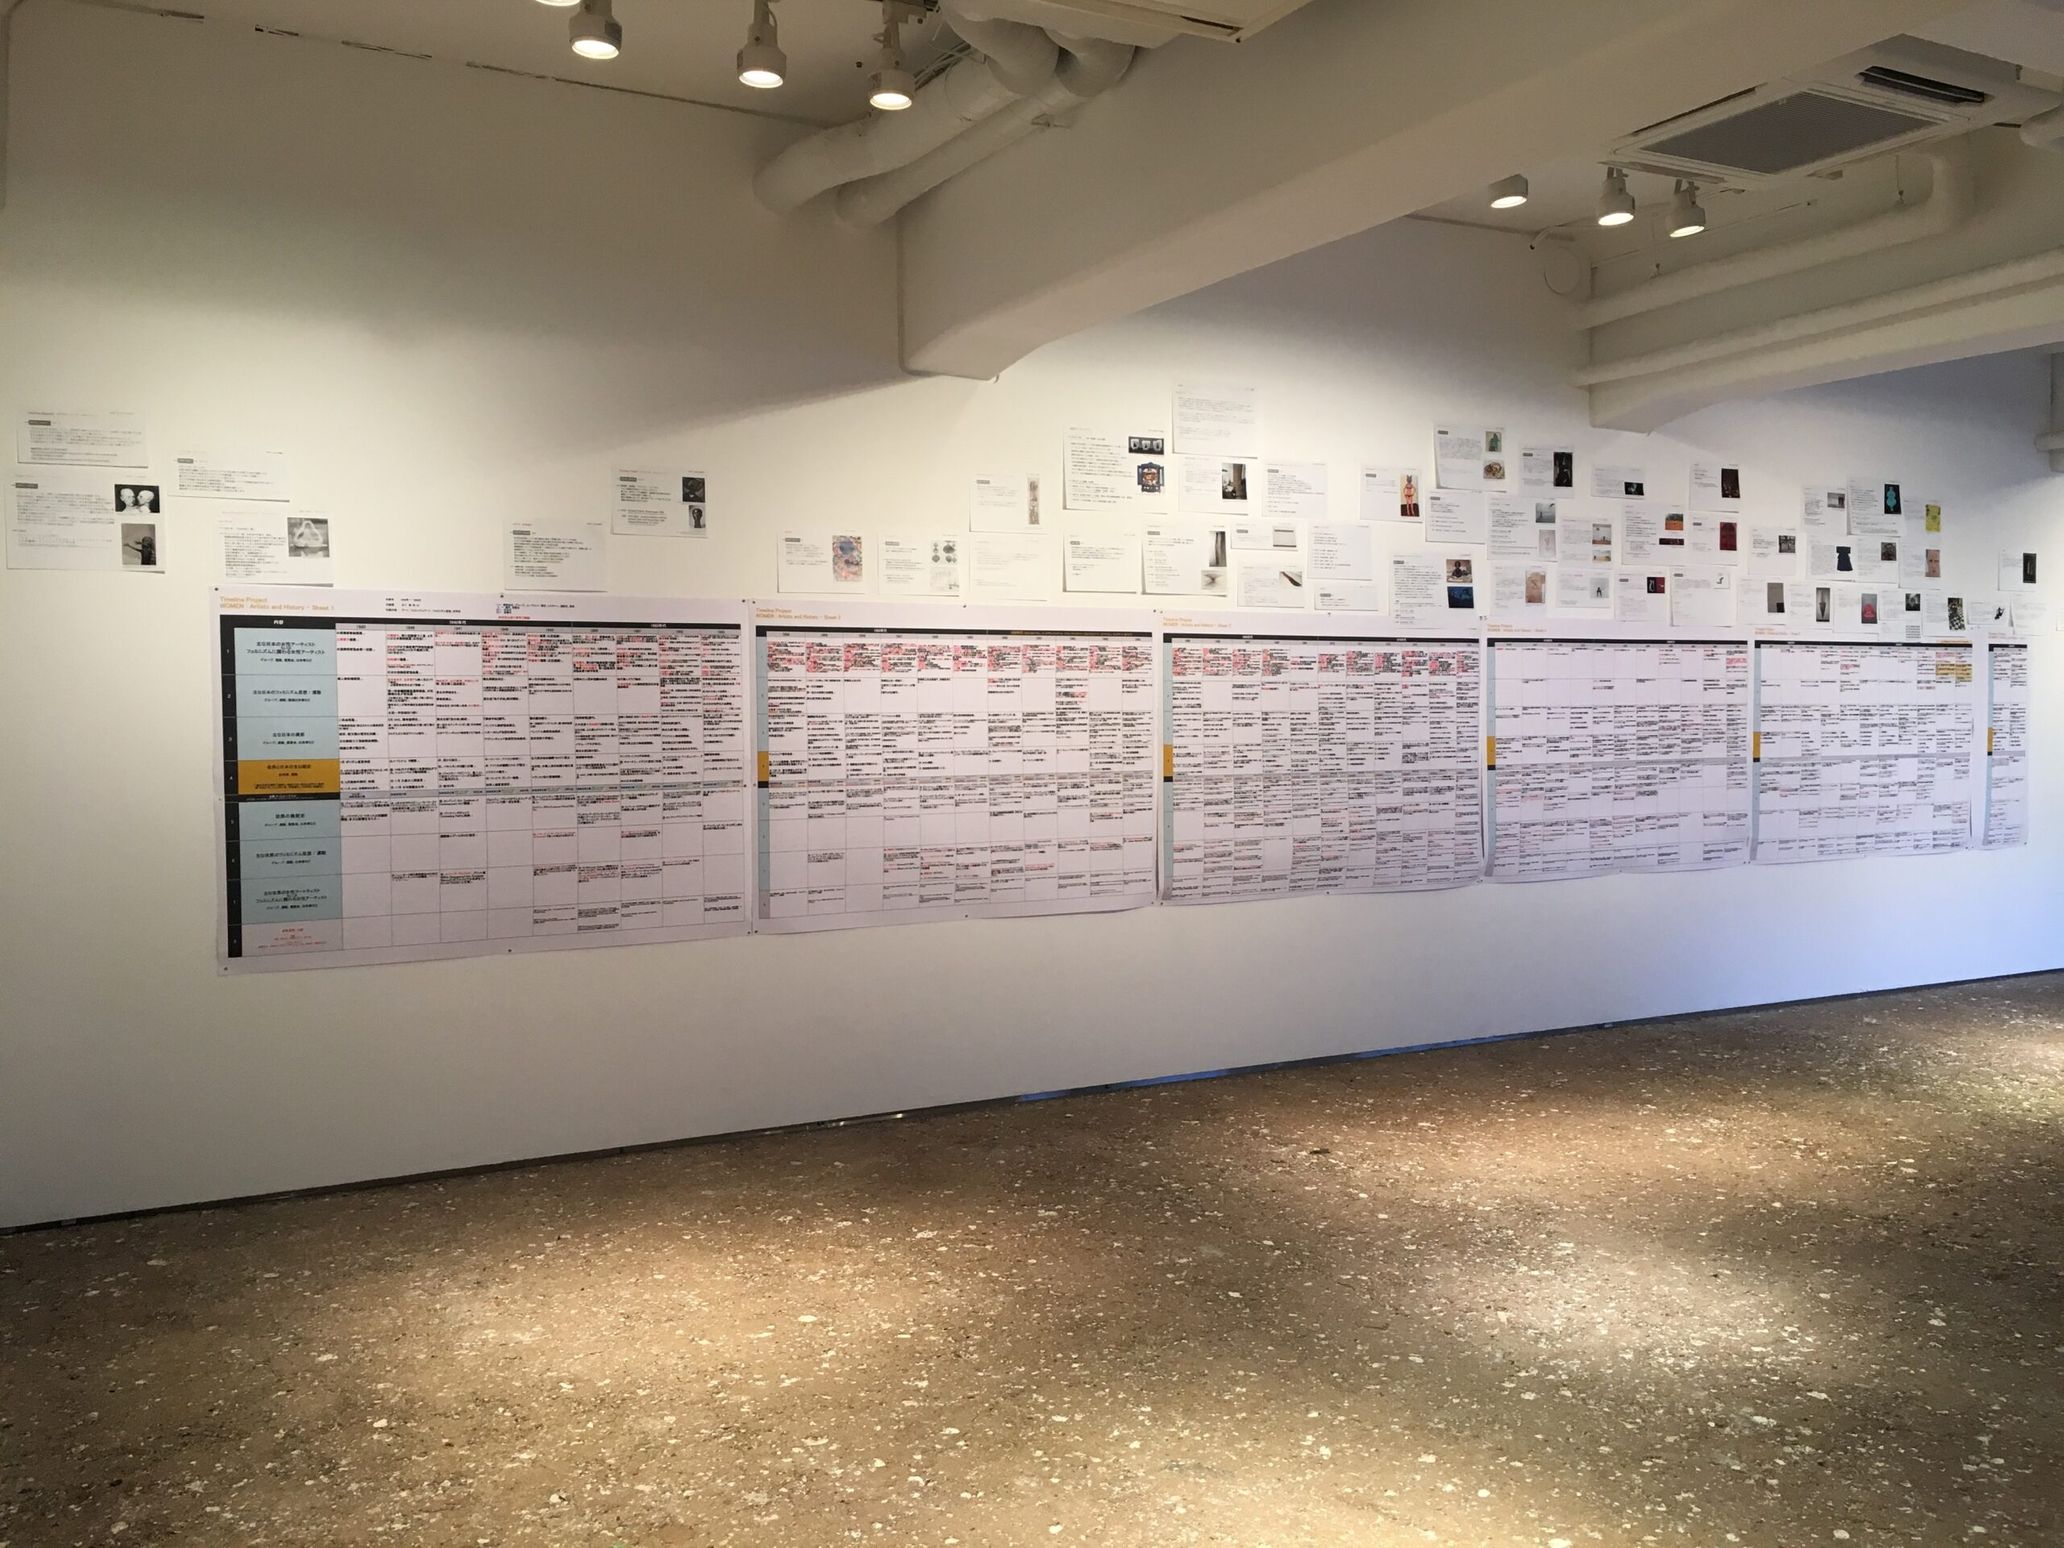 Events held at TOKAS Hongo in 2019, Timeline Project “Women Artists and History” Photography bozzo, ©Tokyo Arts and Space Photography Aisuke Kondo